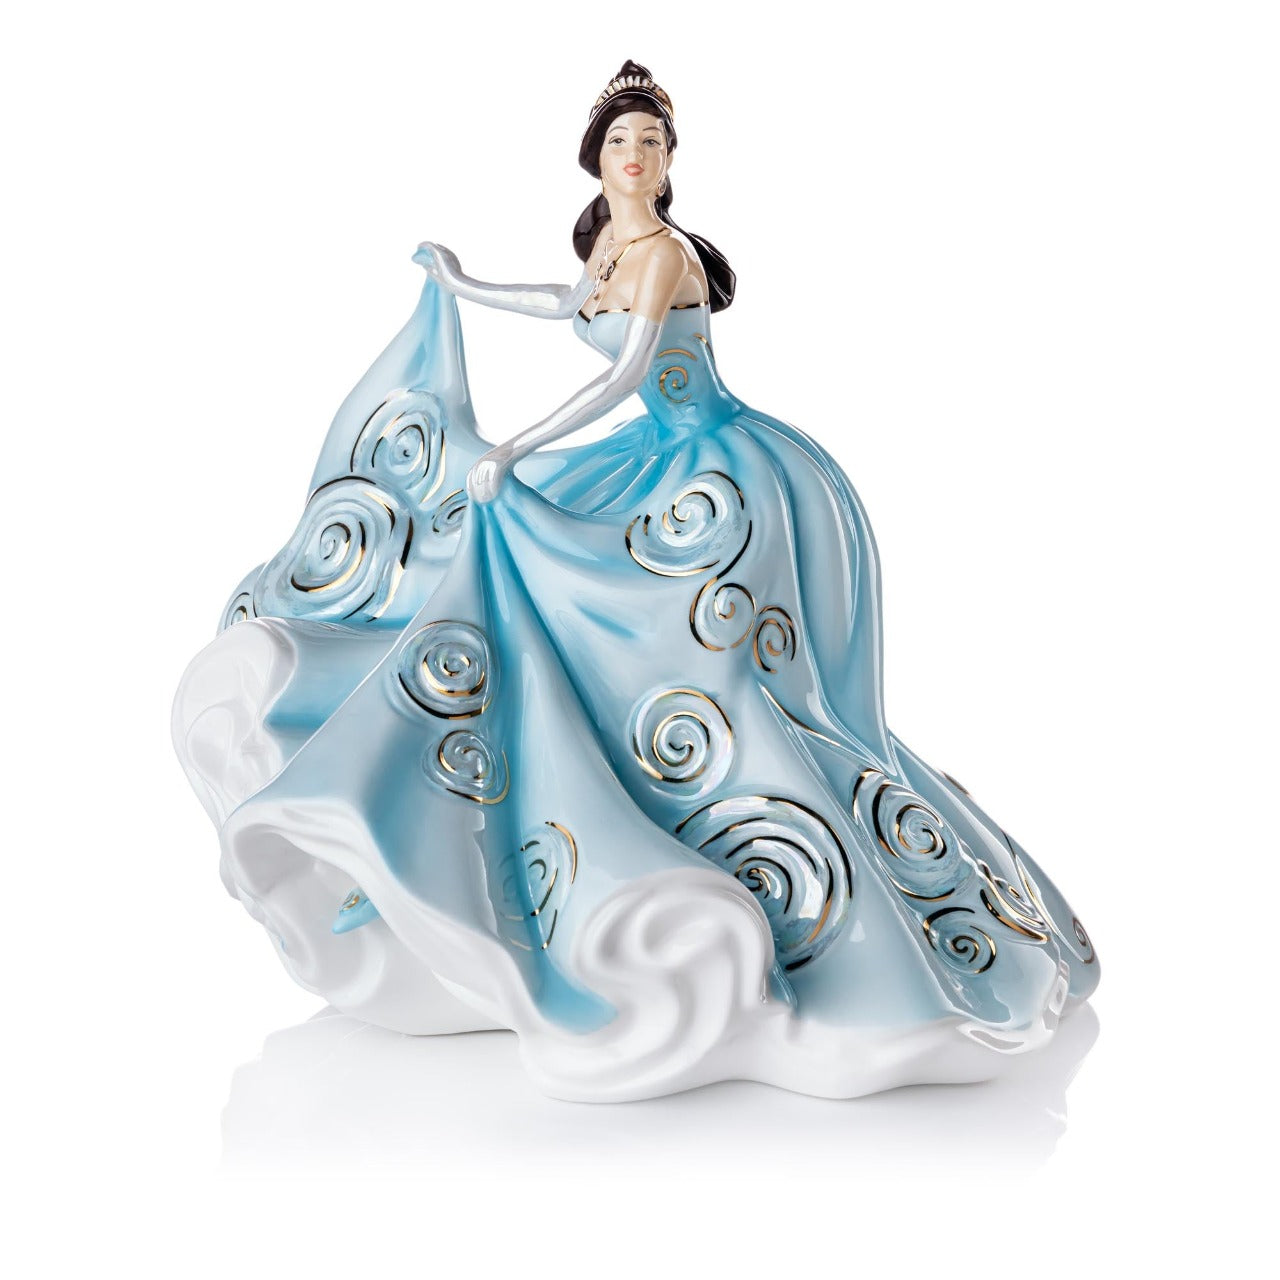 English Ladies Heavenly Charm  The latest figurine to join our English Ladies collection is Heavenly Charm. This beautiful figurine is part of our Charm range following the same hand-crafted design as Golden Charm and Sweet Charm. This gorgeous figurine is dressed pastel blue gown which is detailed with real gold highlights that glisten in the light.